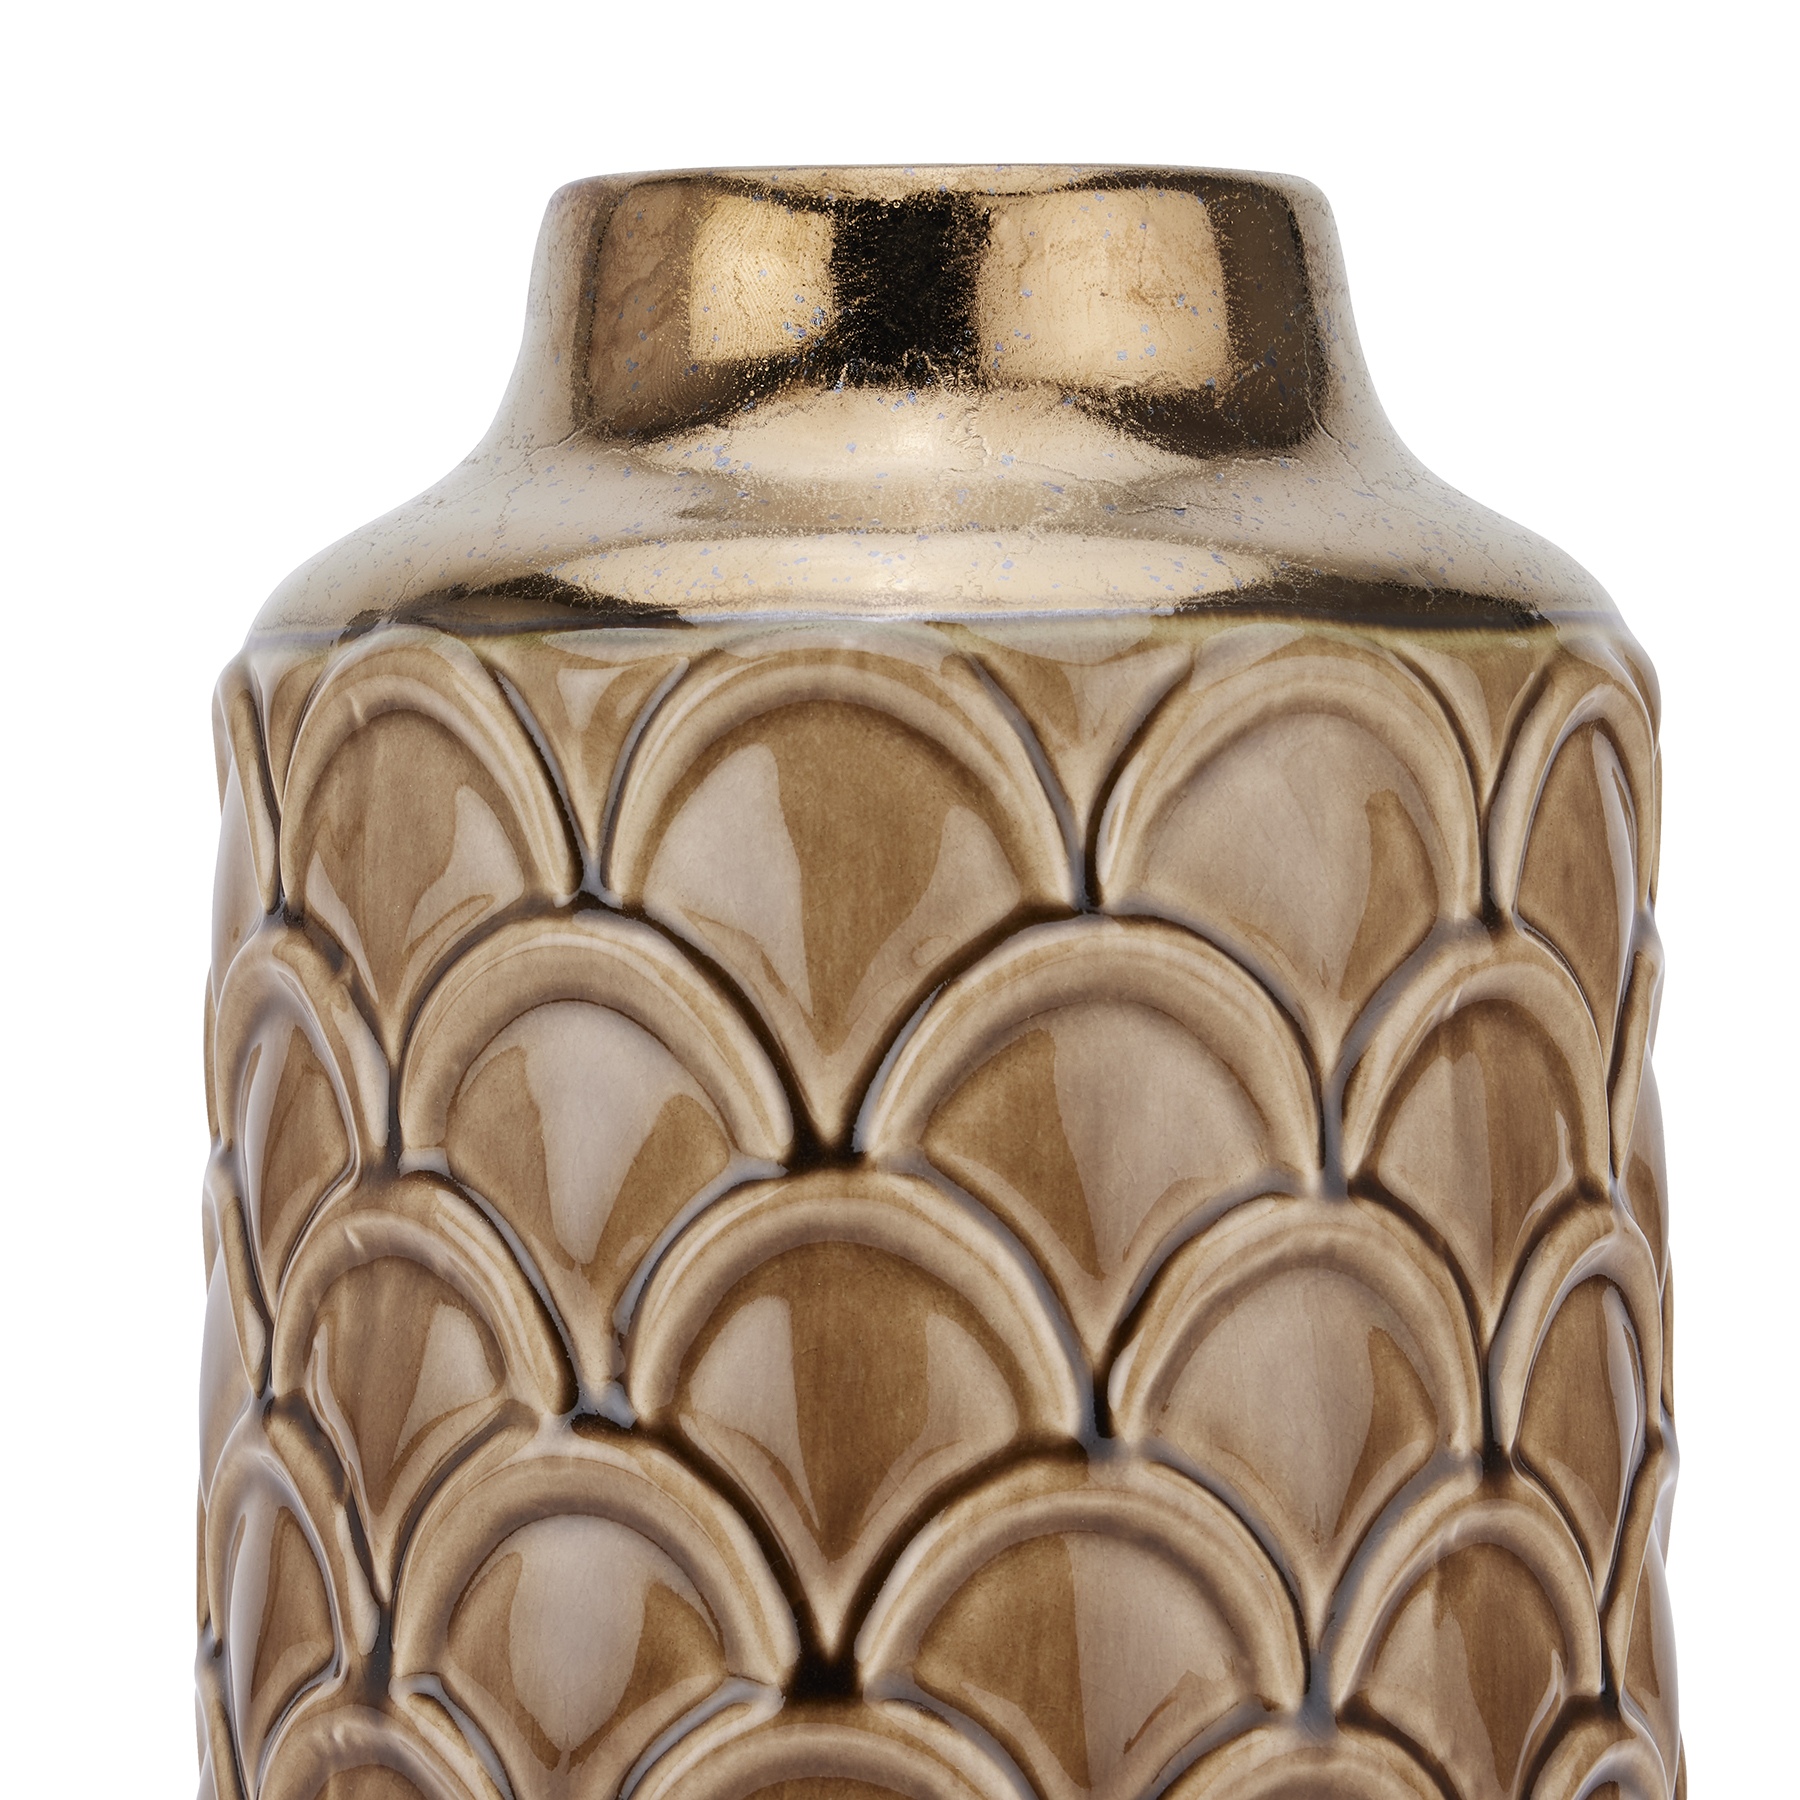 Seville Collection Small Caramel Scalloped Vase - Image 2